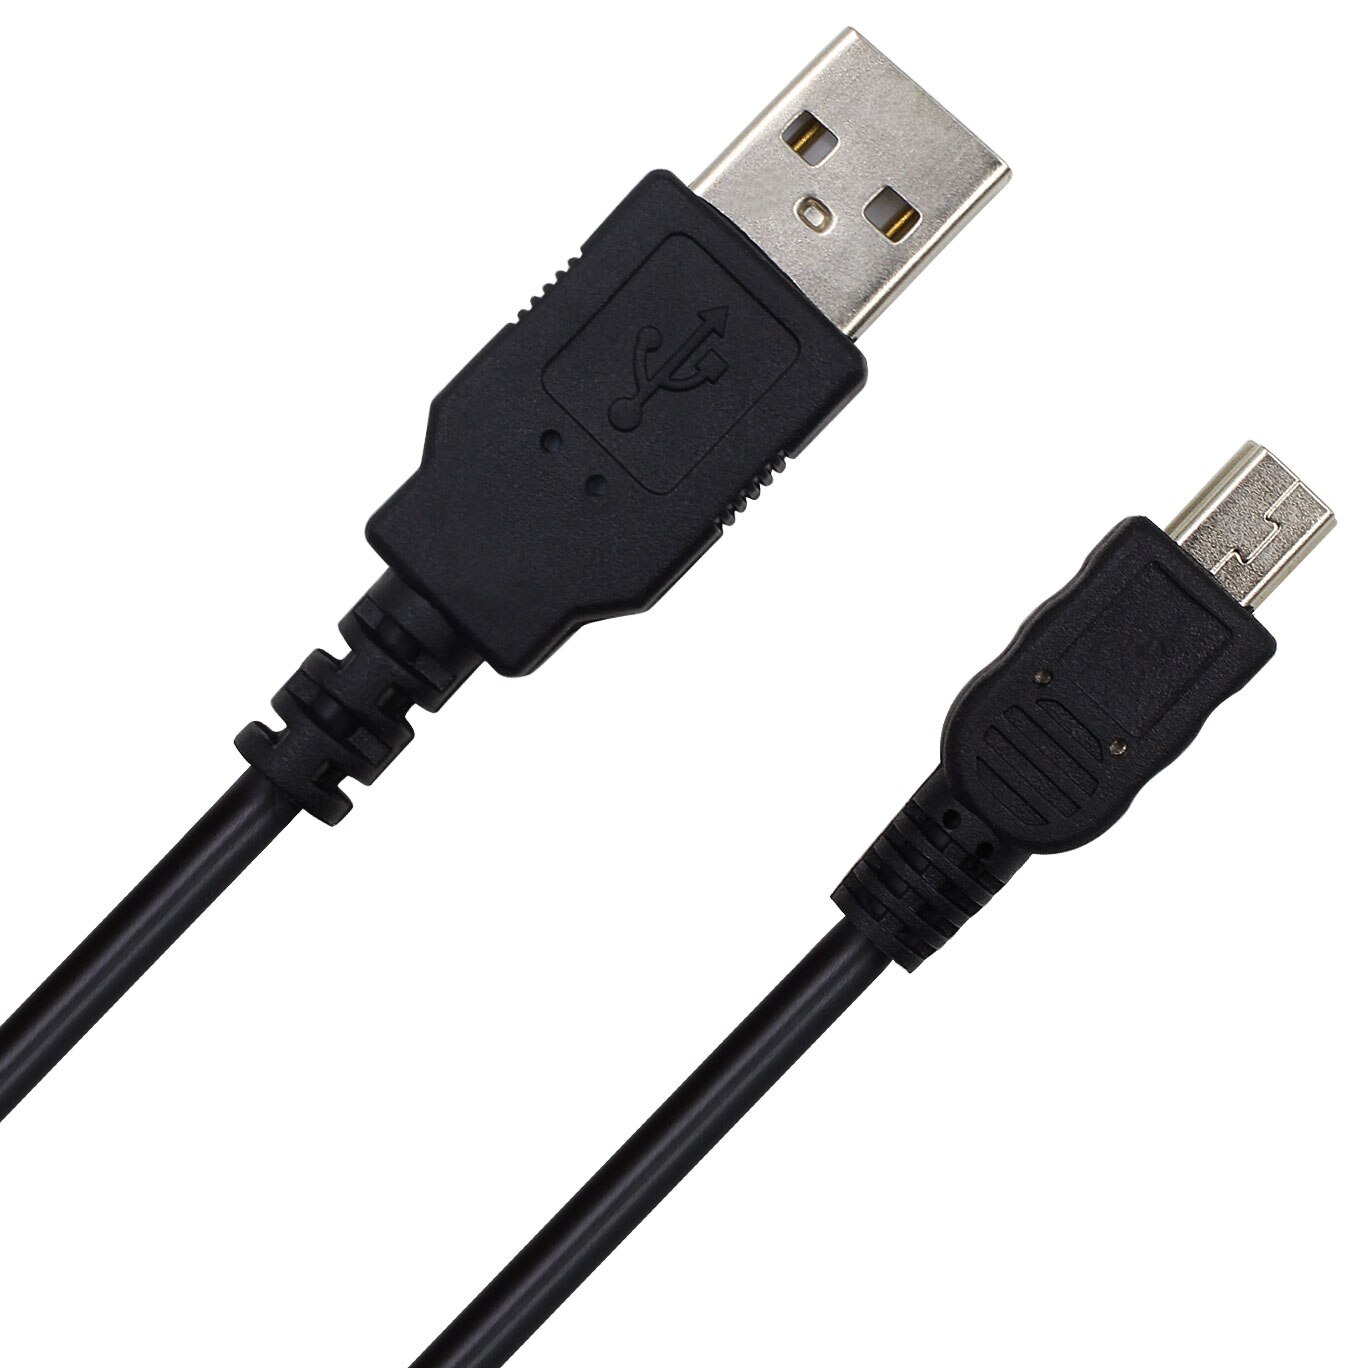 USB Power Adapter Charger Cable Koord Voor Leapfrog Leappad Ultra